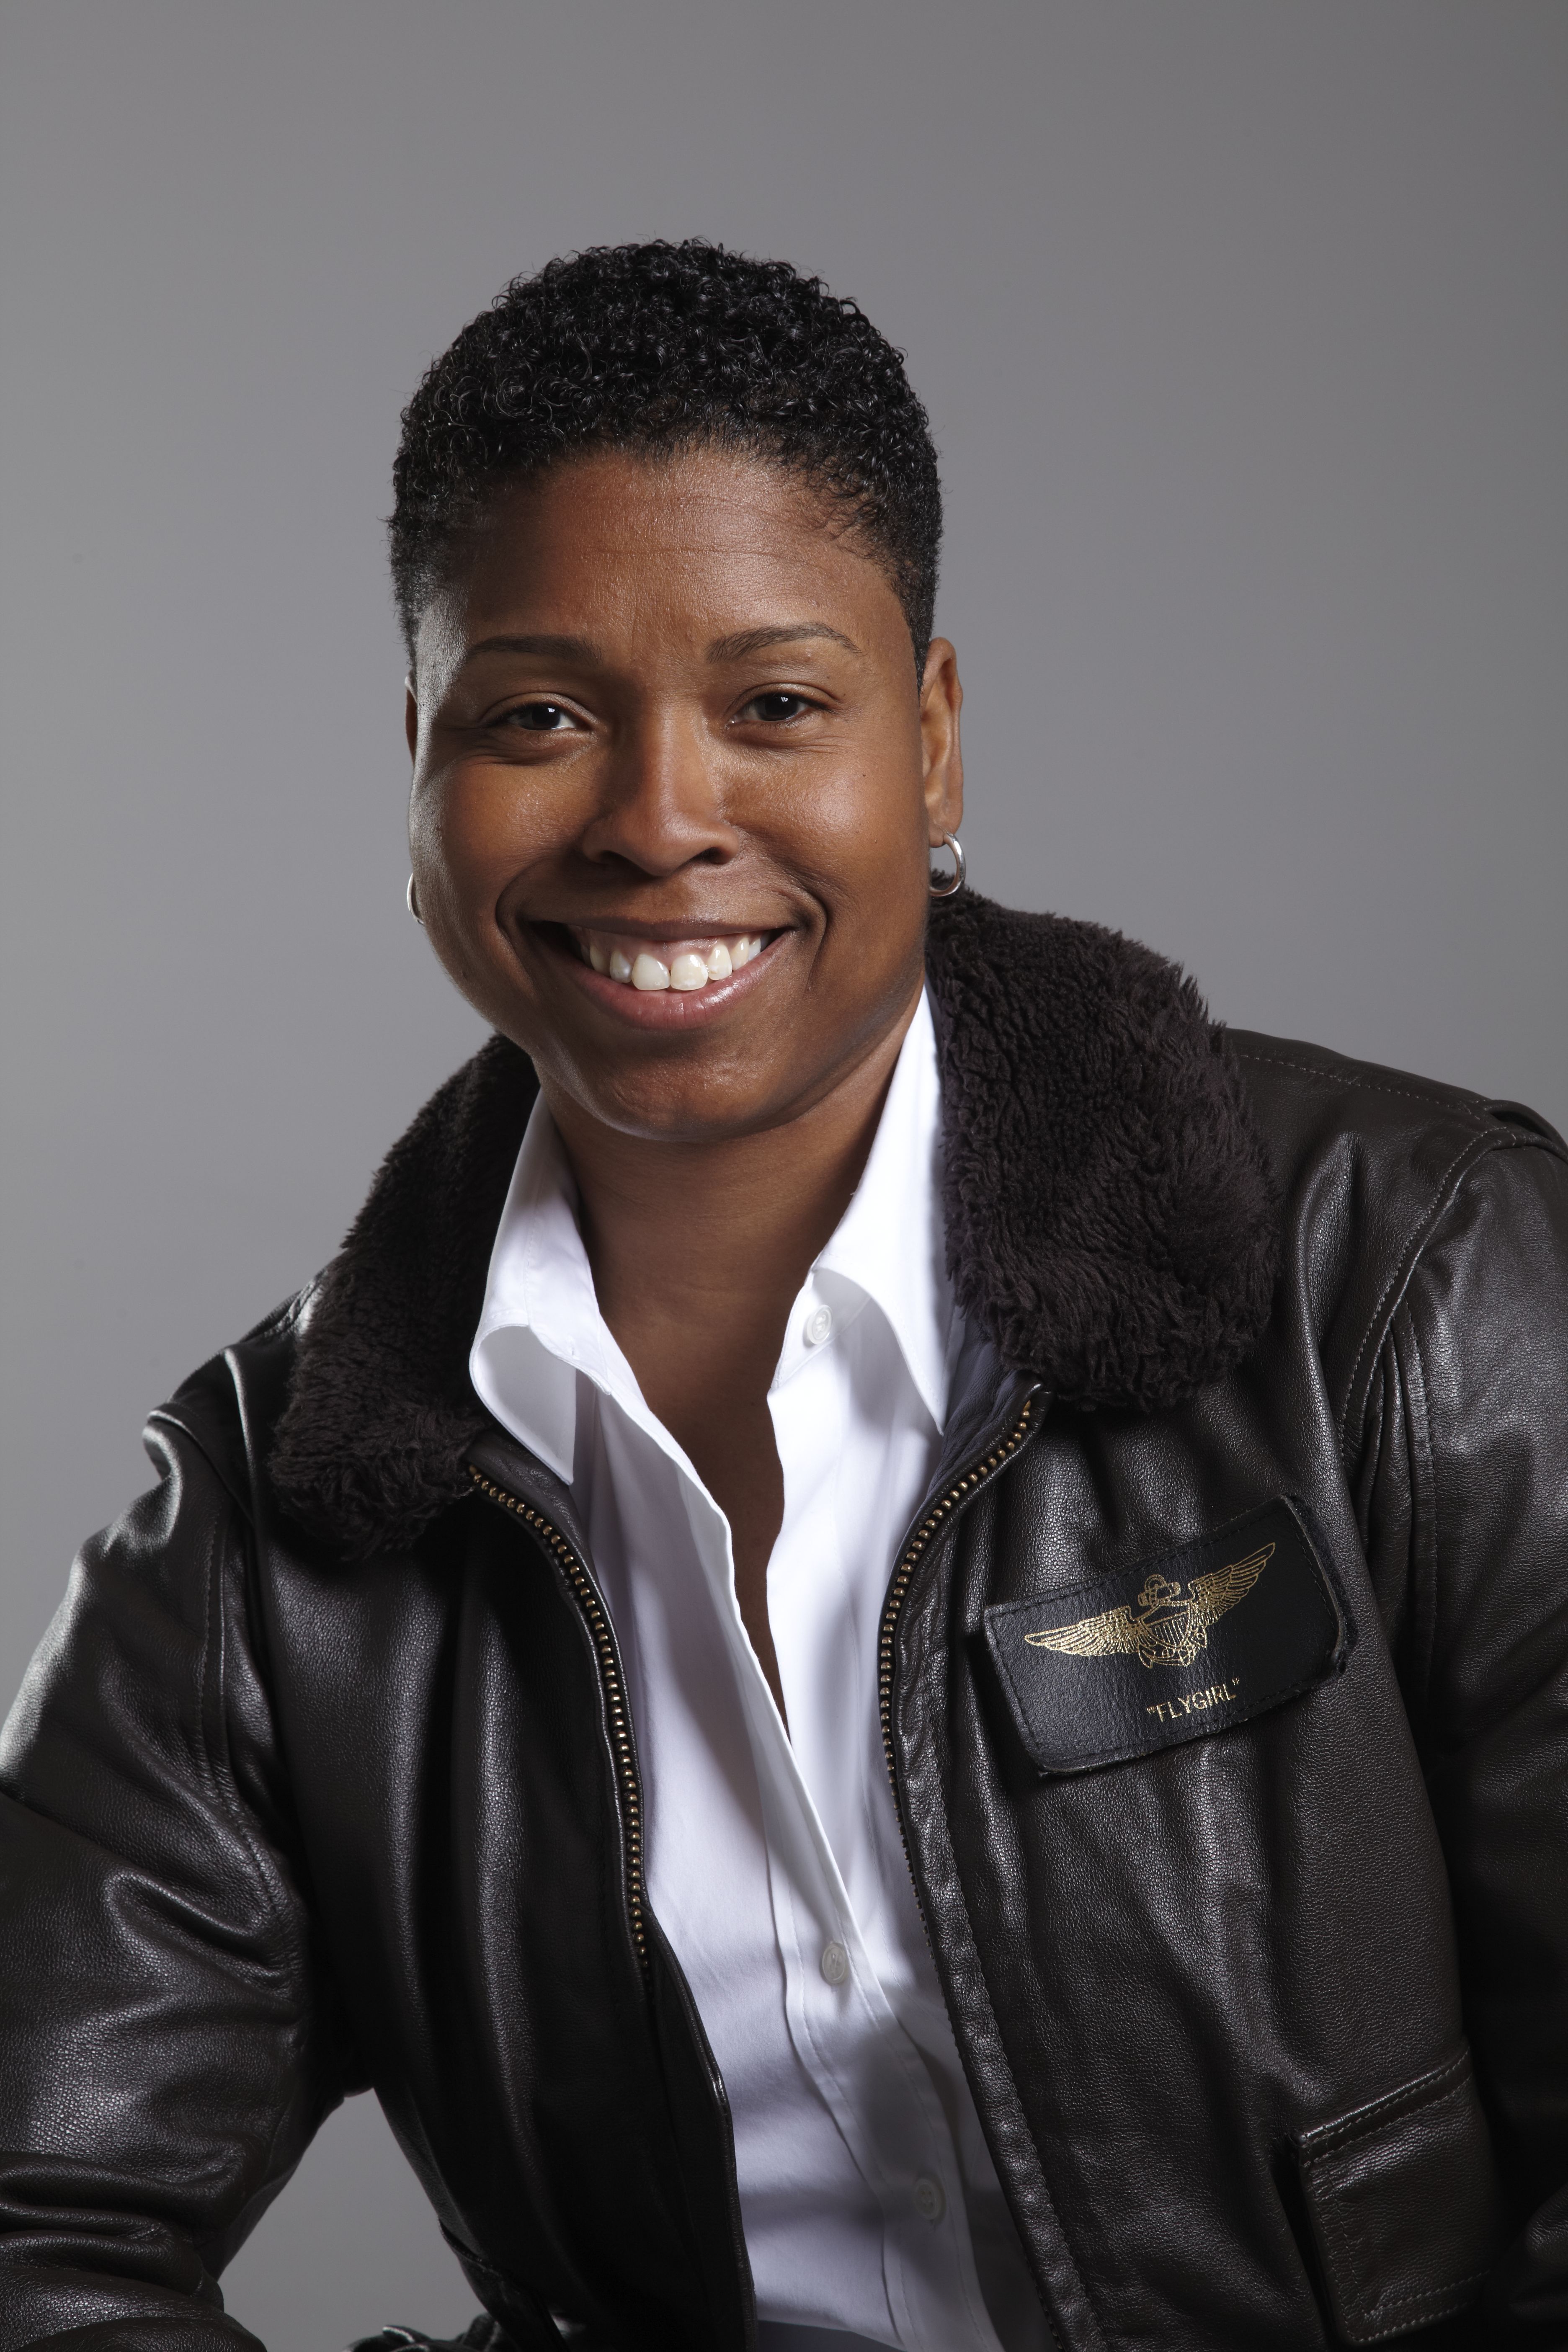 Those attending UMA’s Virtual Commencement will have the opportunity to hear a keynote address by Vernice “FlyGirl” Armour, America’s First African American Female Combat Pilot.